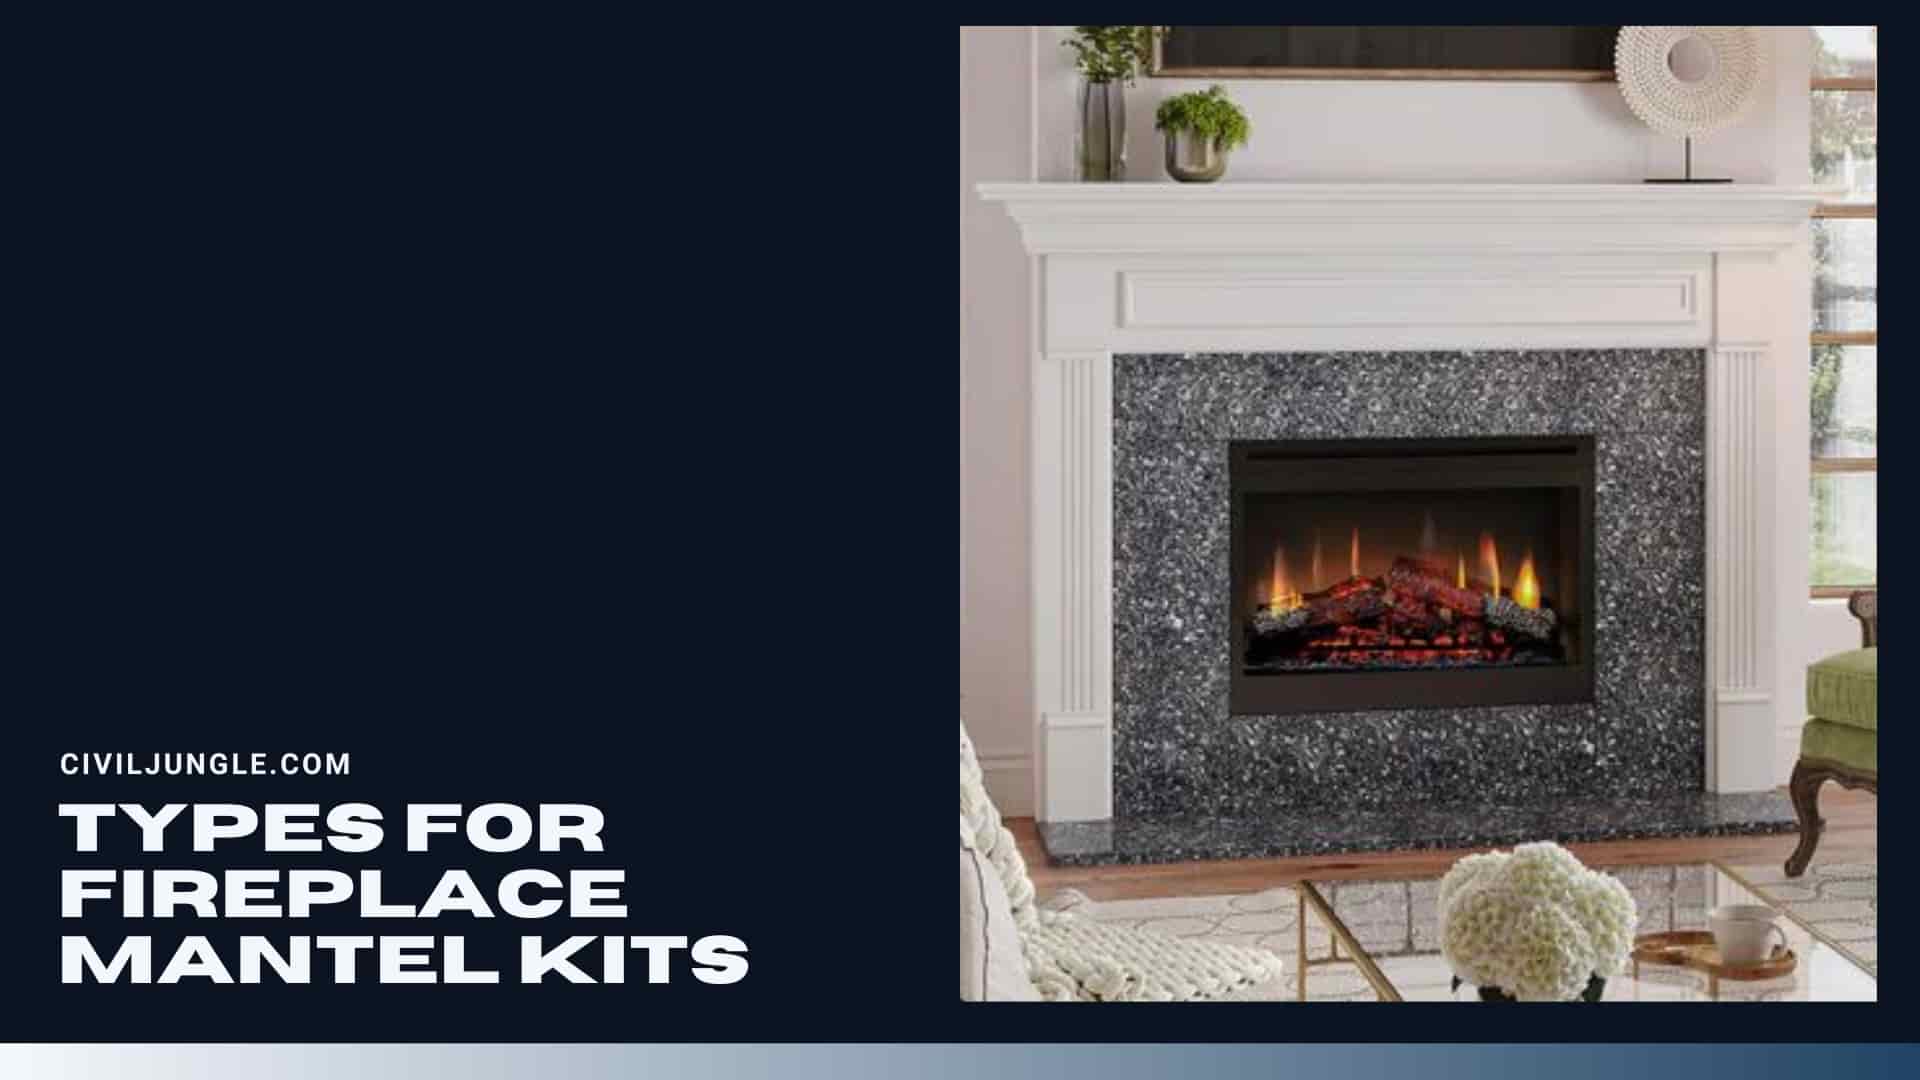 Types for Fireplace Mantel Kits 